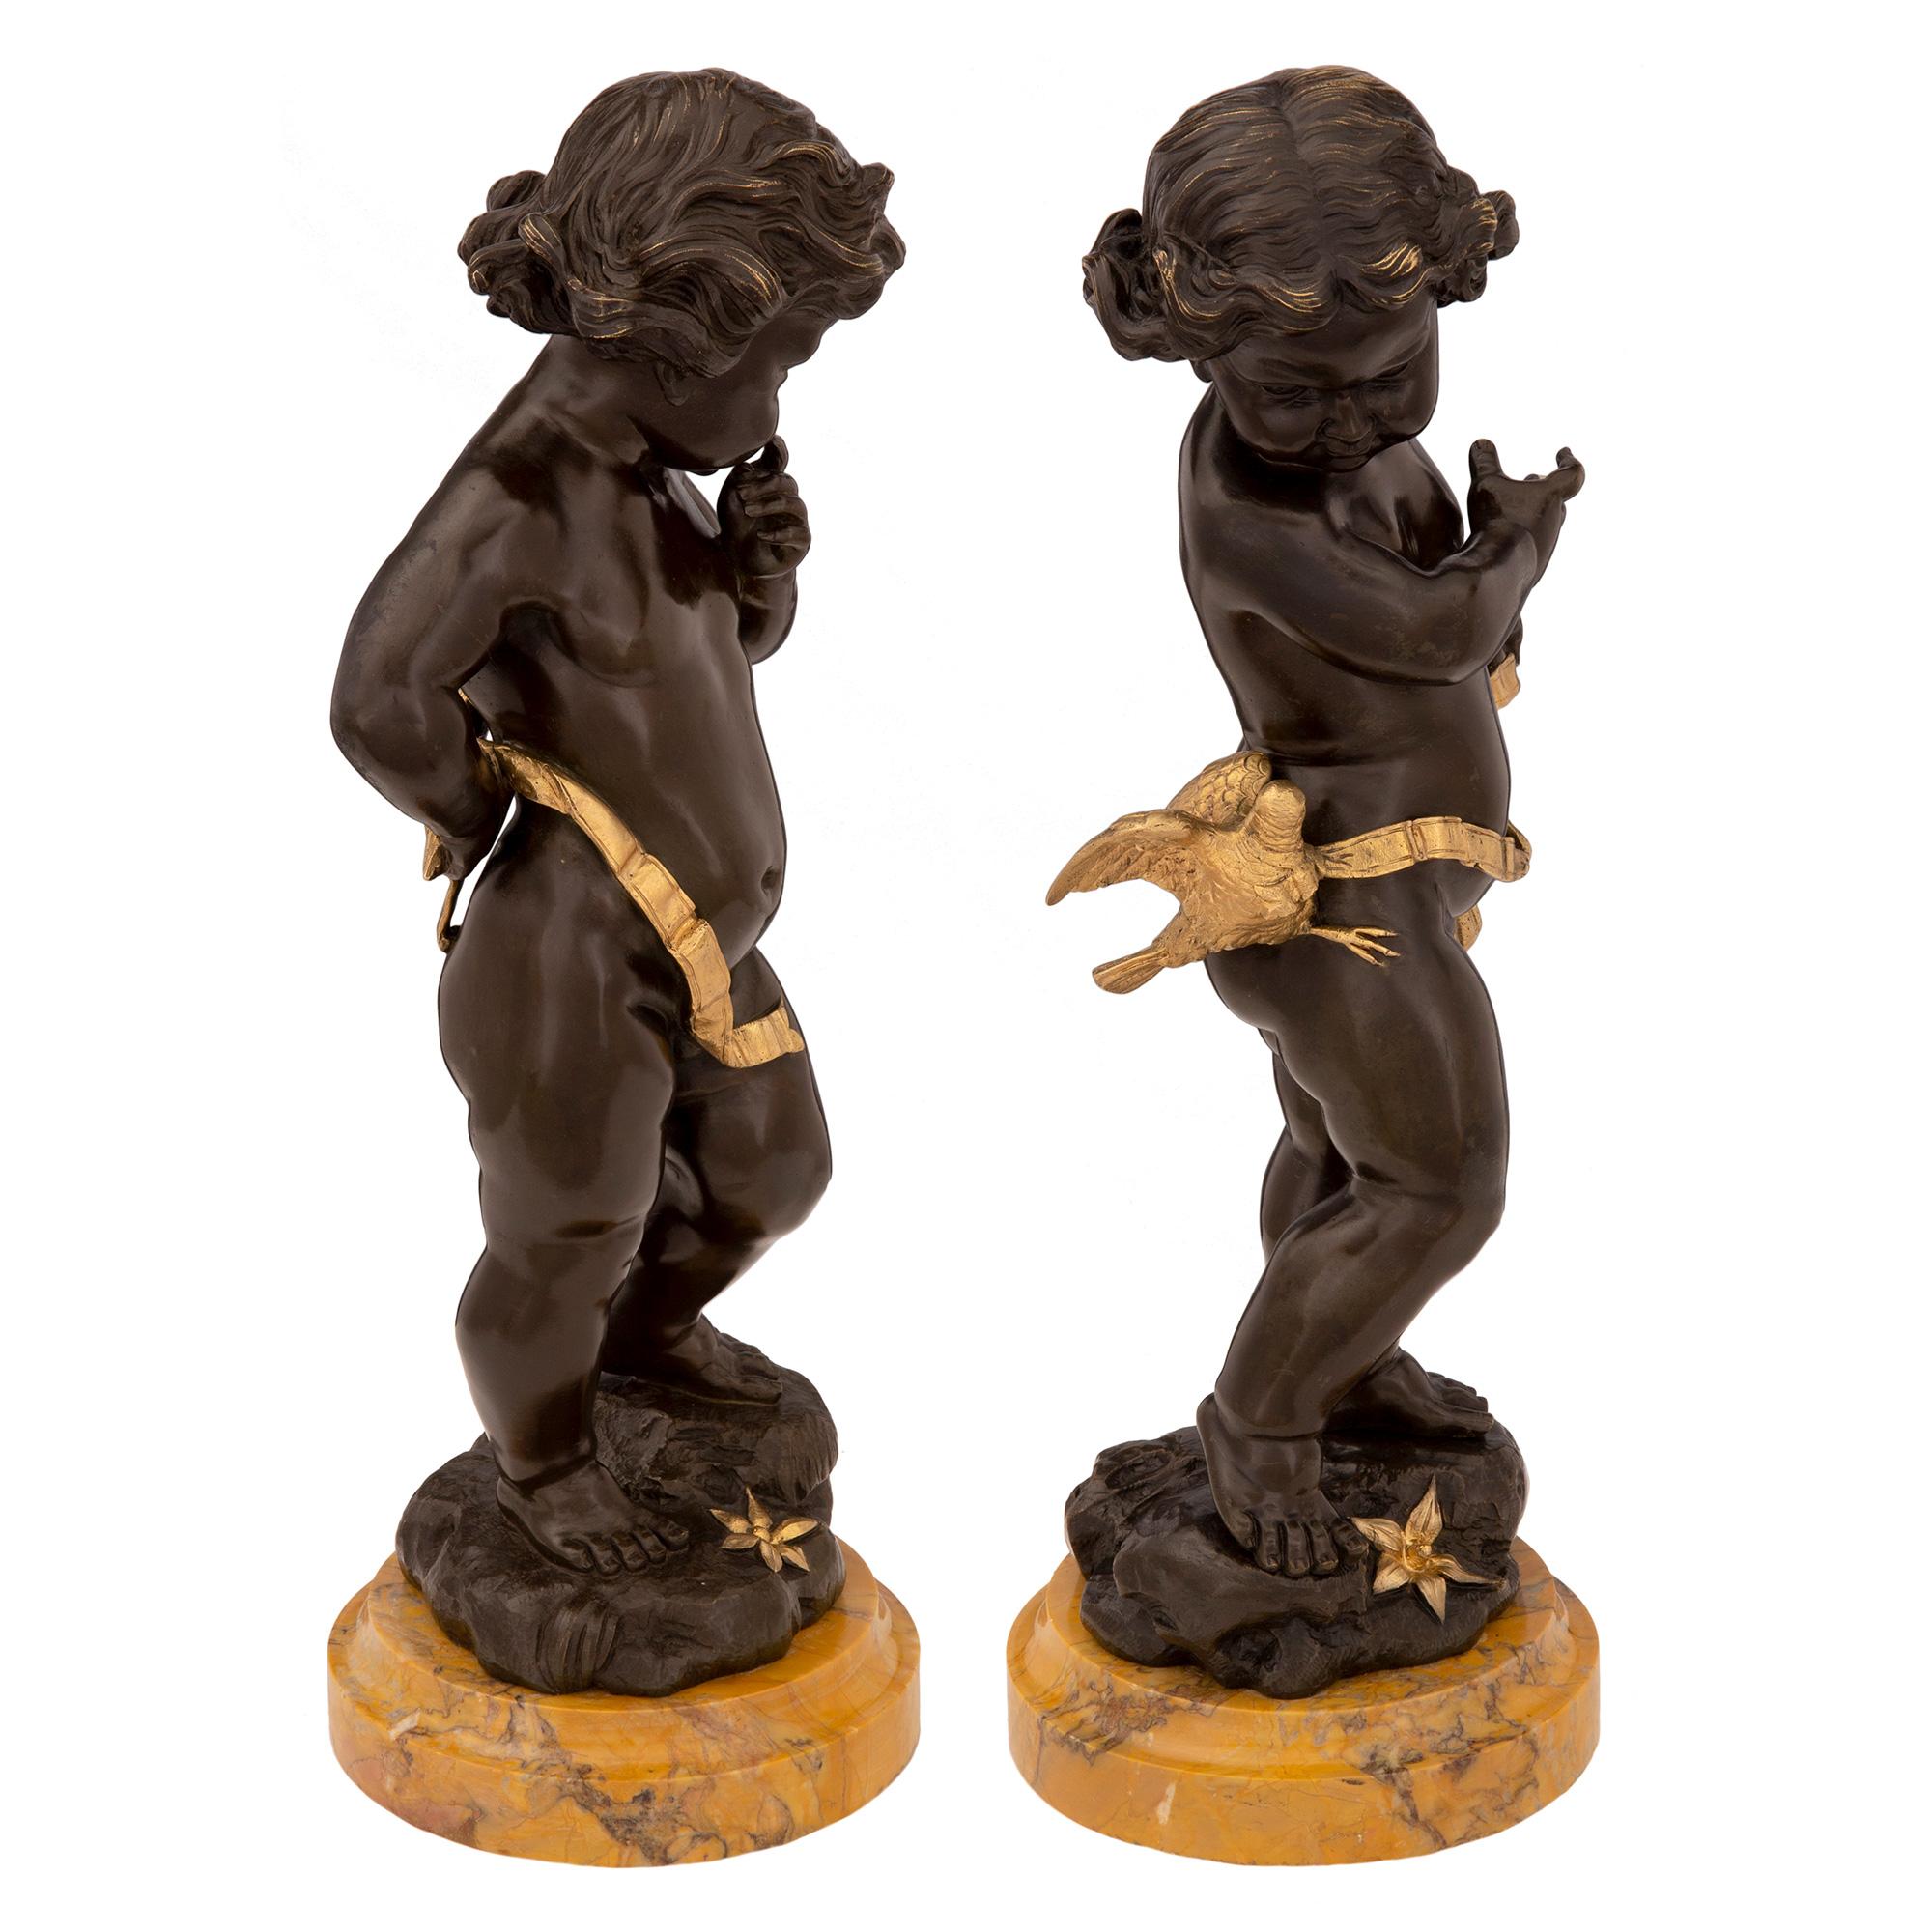 A most elegant and high quality true pair of French 19th century Louis XVI st. patinated bronze, ormolu and Sienna marble statues. Each beautiful statue is raised by a circular Sienna marble base with a fine mottled border. The lovely richly chased